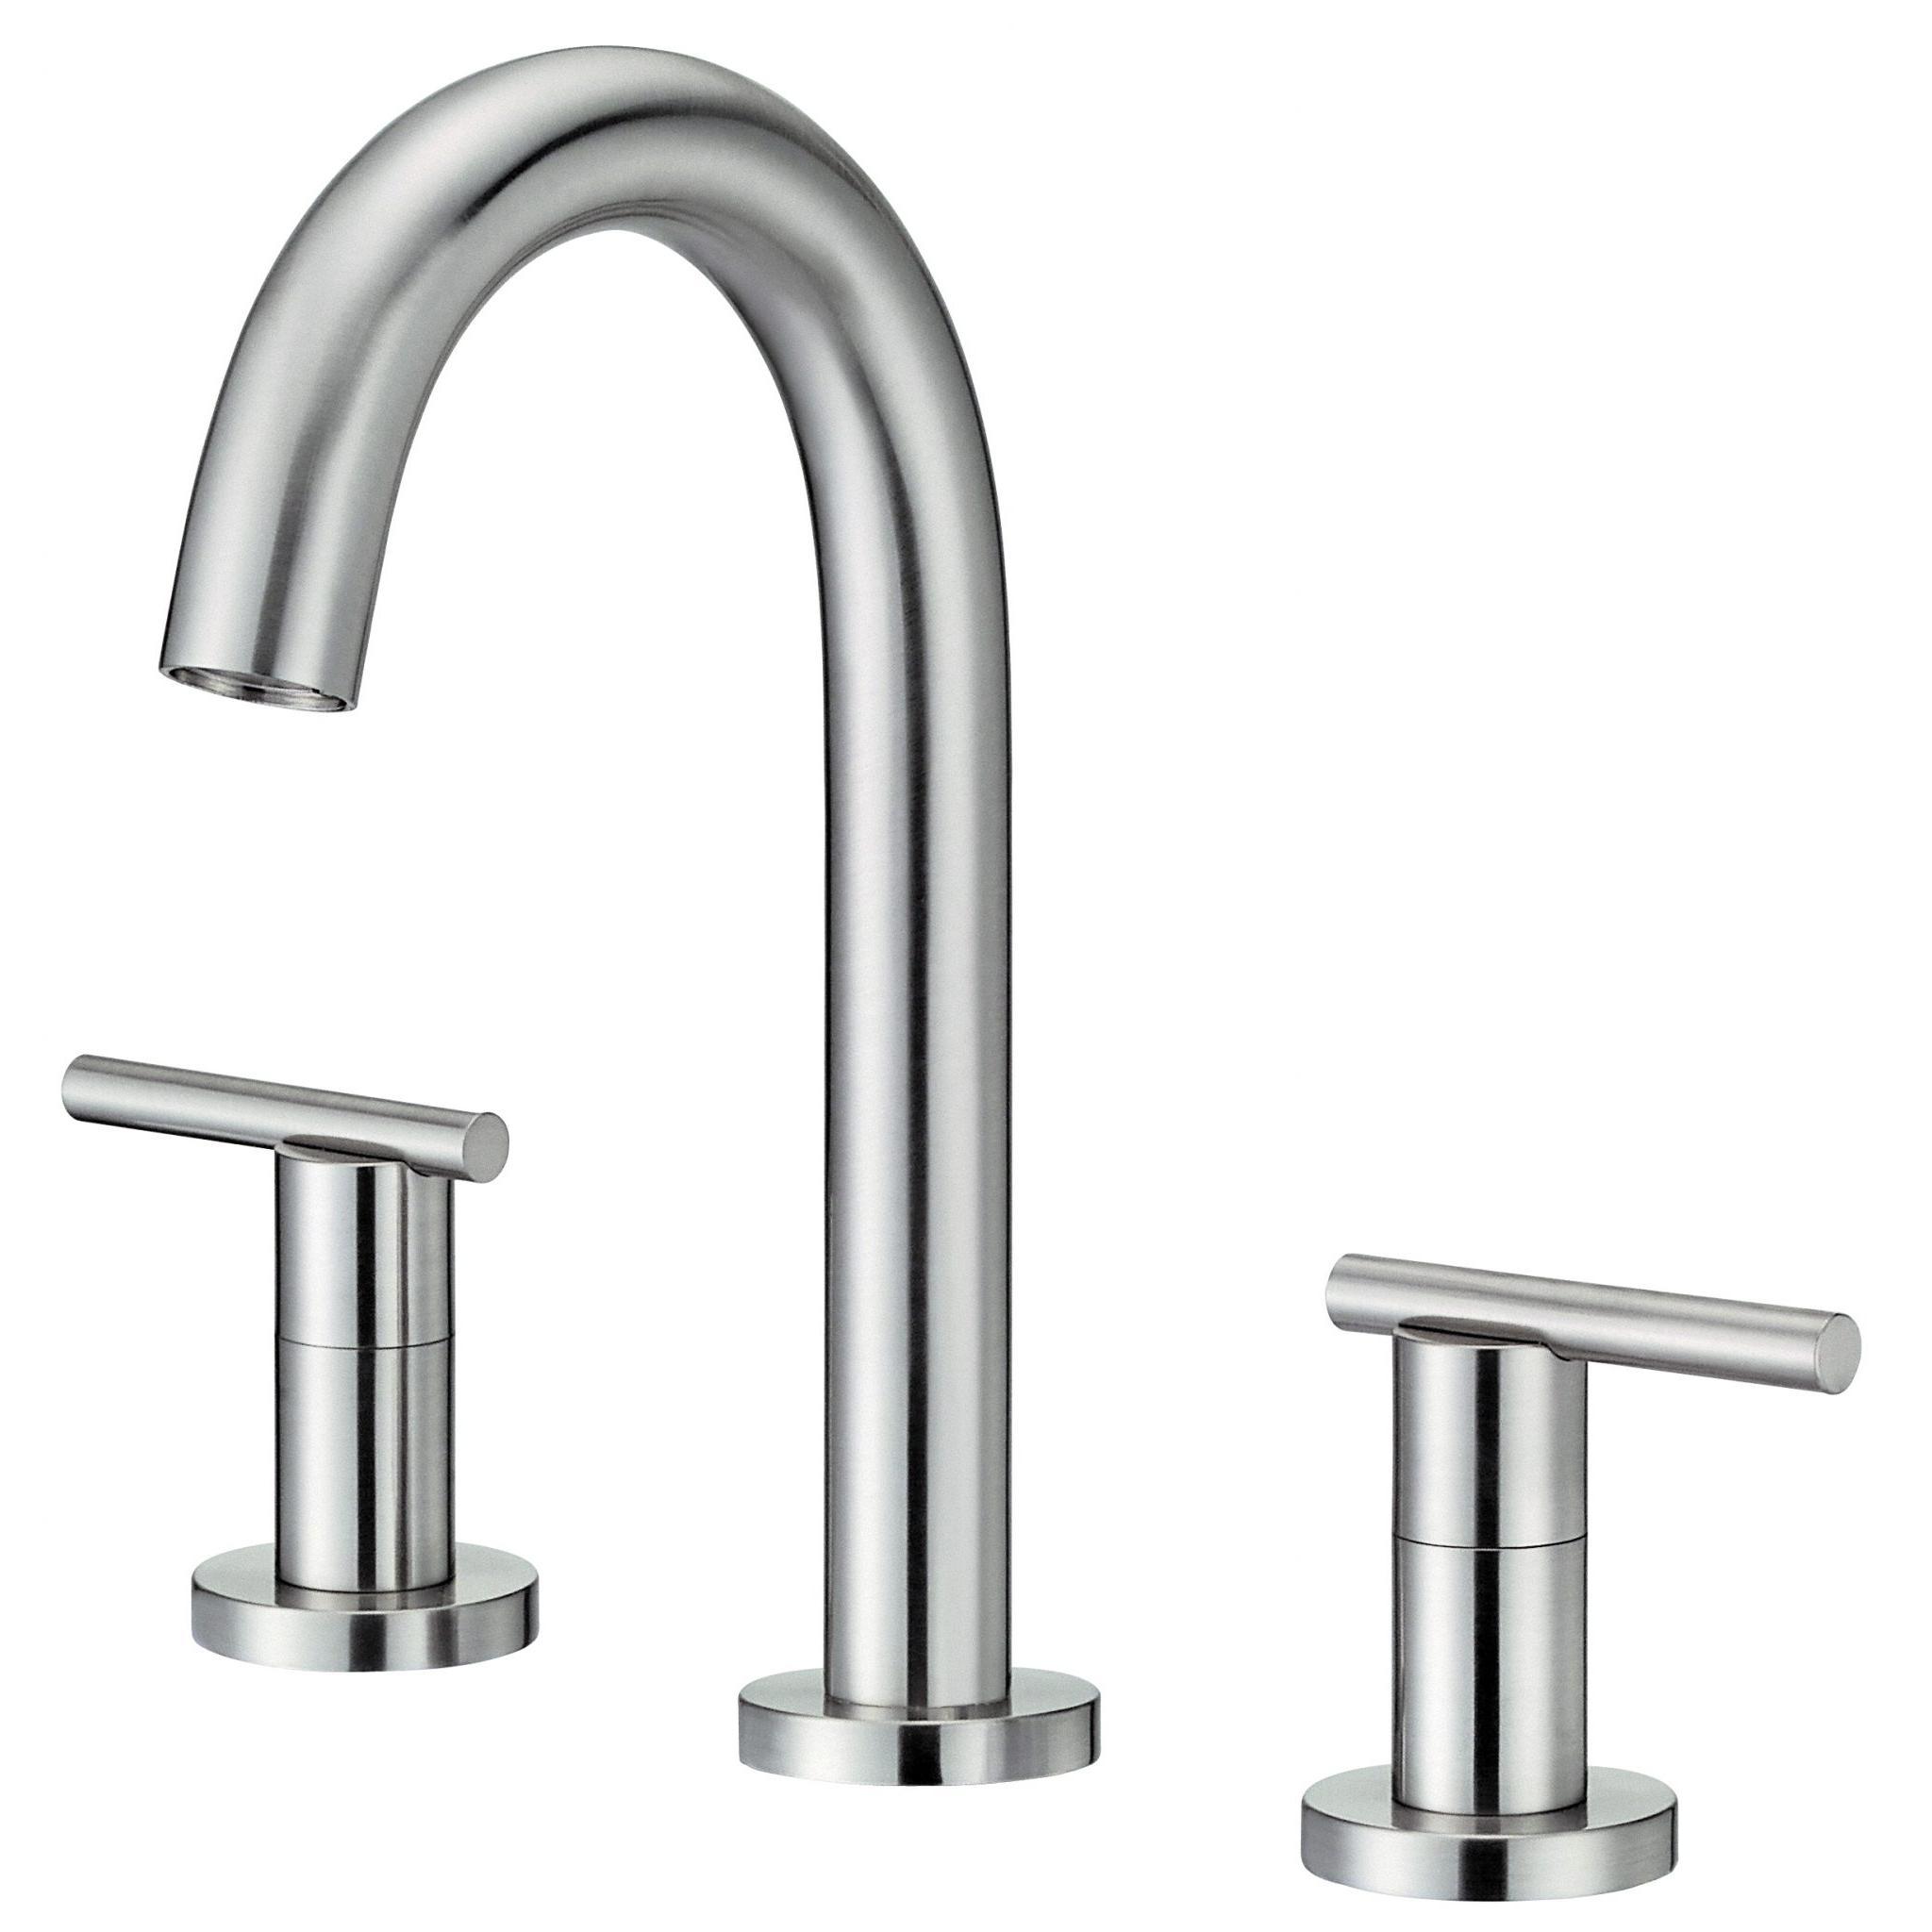 Danze D303658BN Parma Trim Line 2H Widespread Lavatory Faucet w/ Metal Touch Down Drain - Brushed Nickel